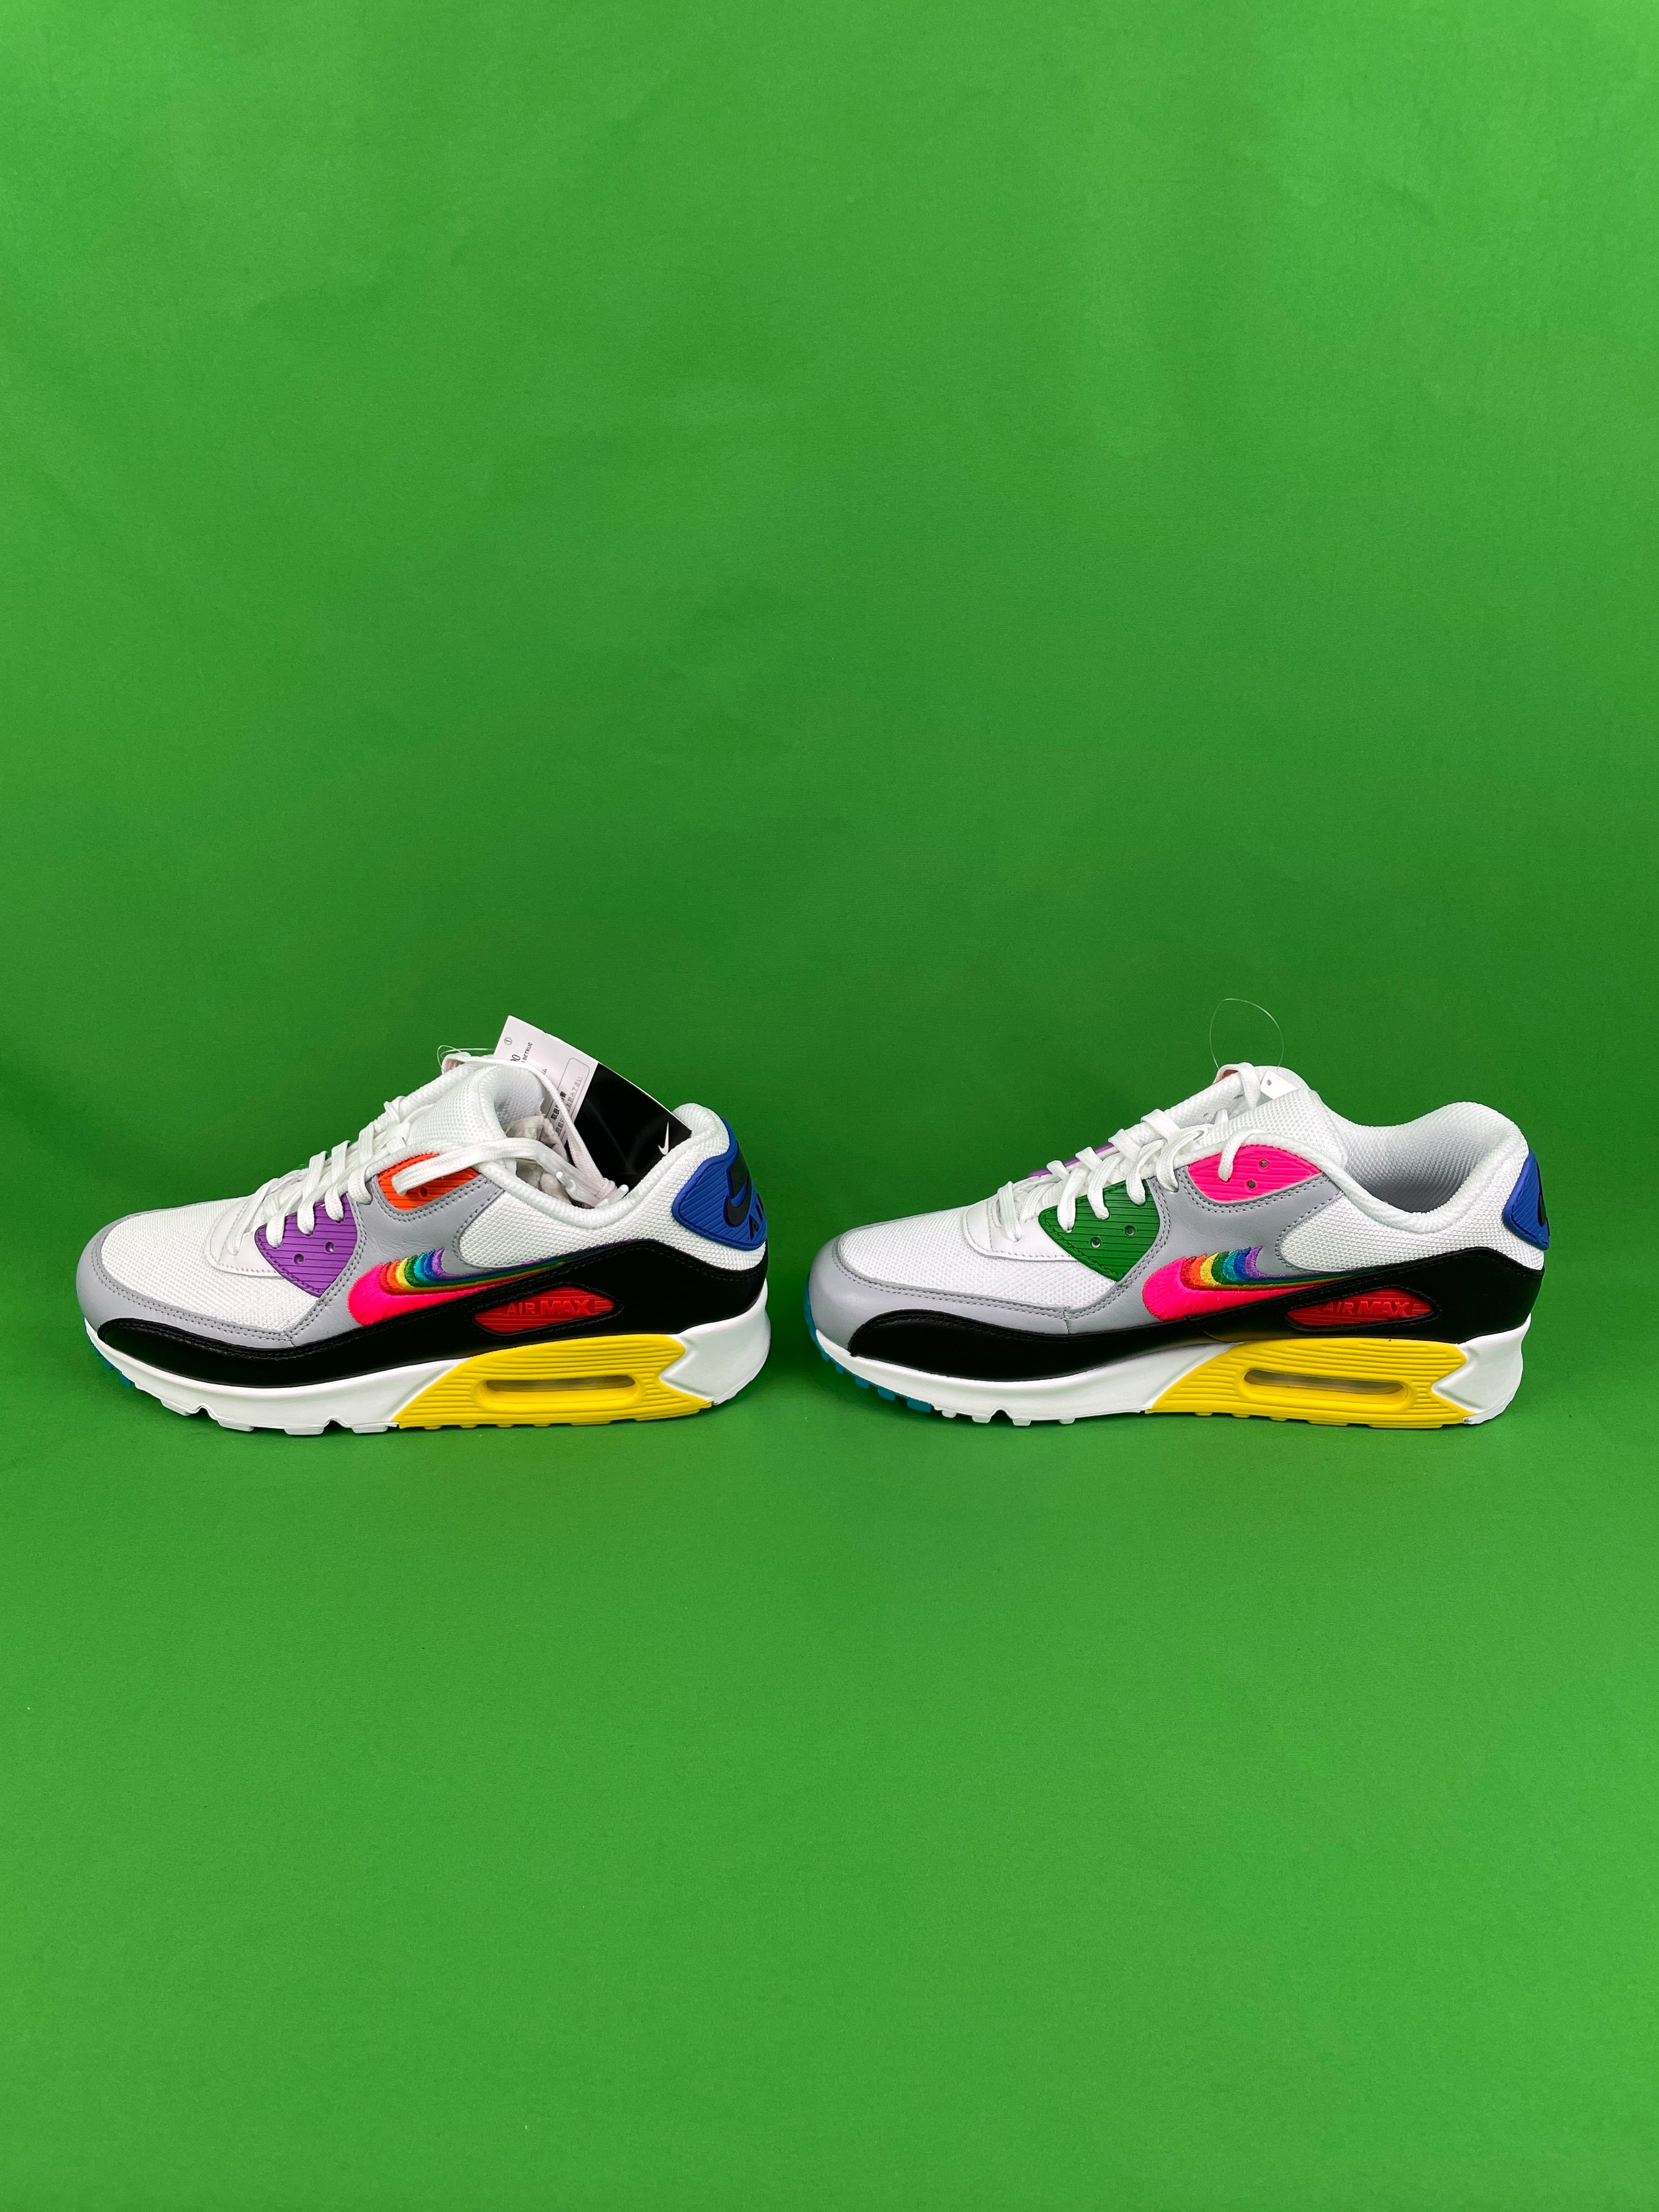 NIKE AIR MAX 90 BETRUE 27.5 | M＆M Select shop powered by BASE